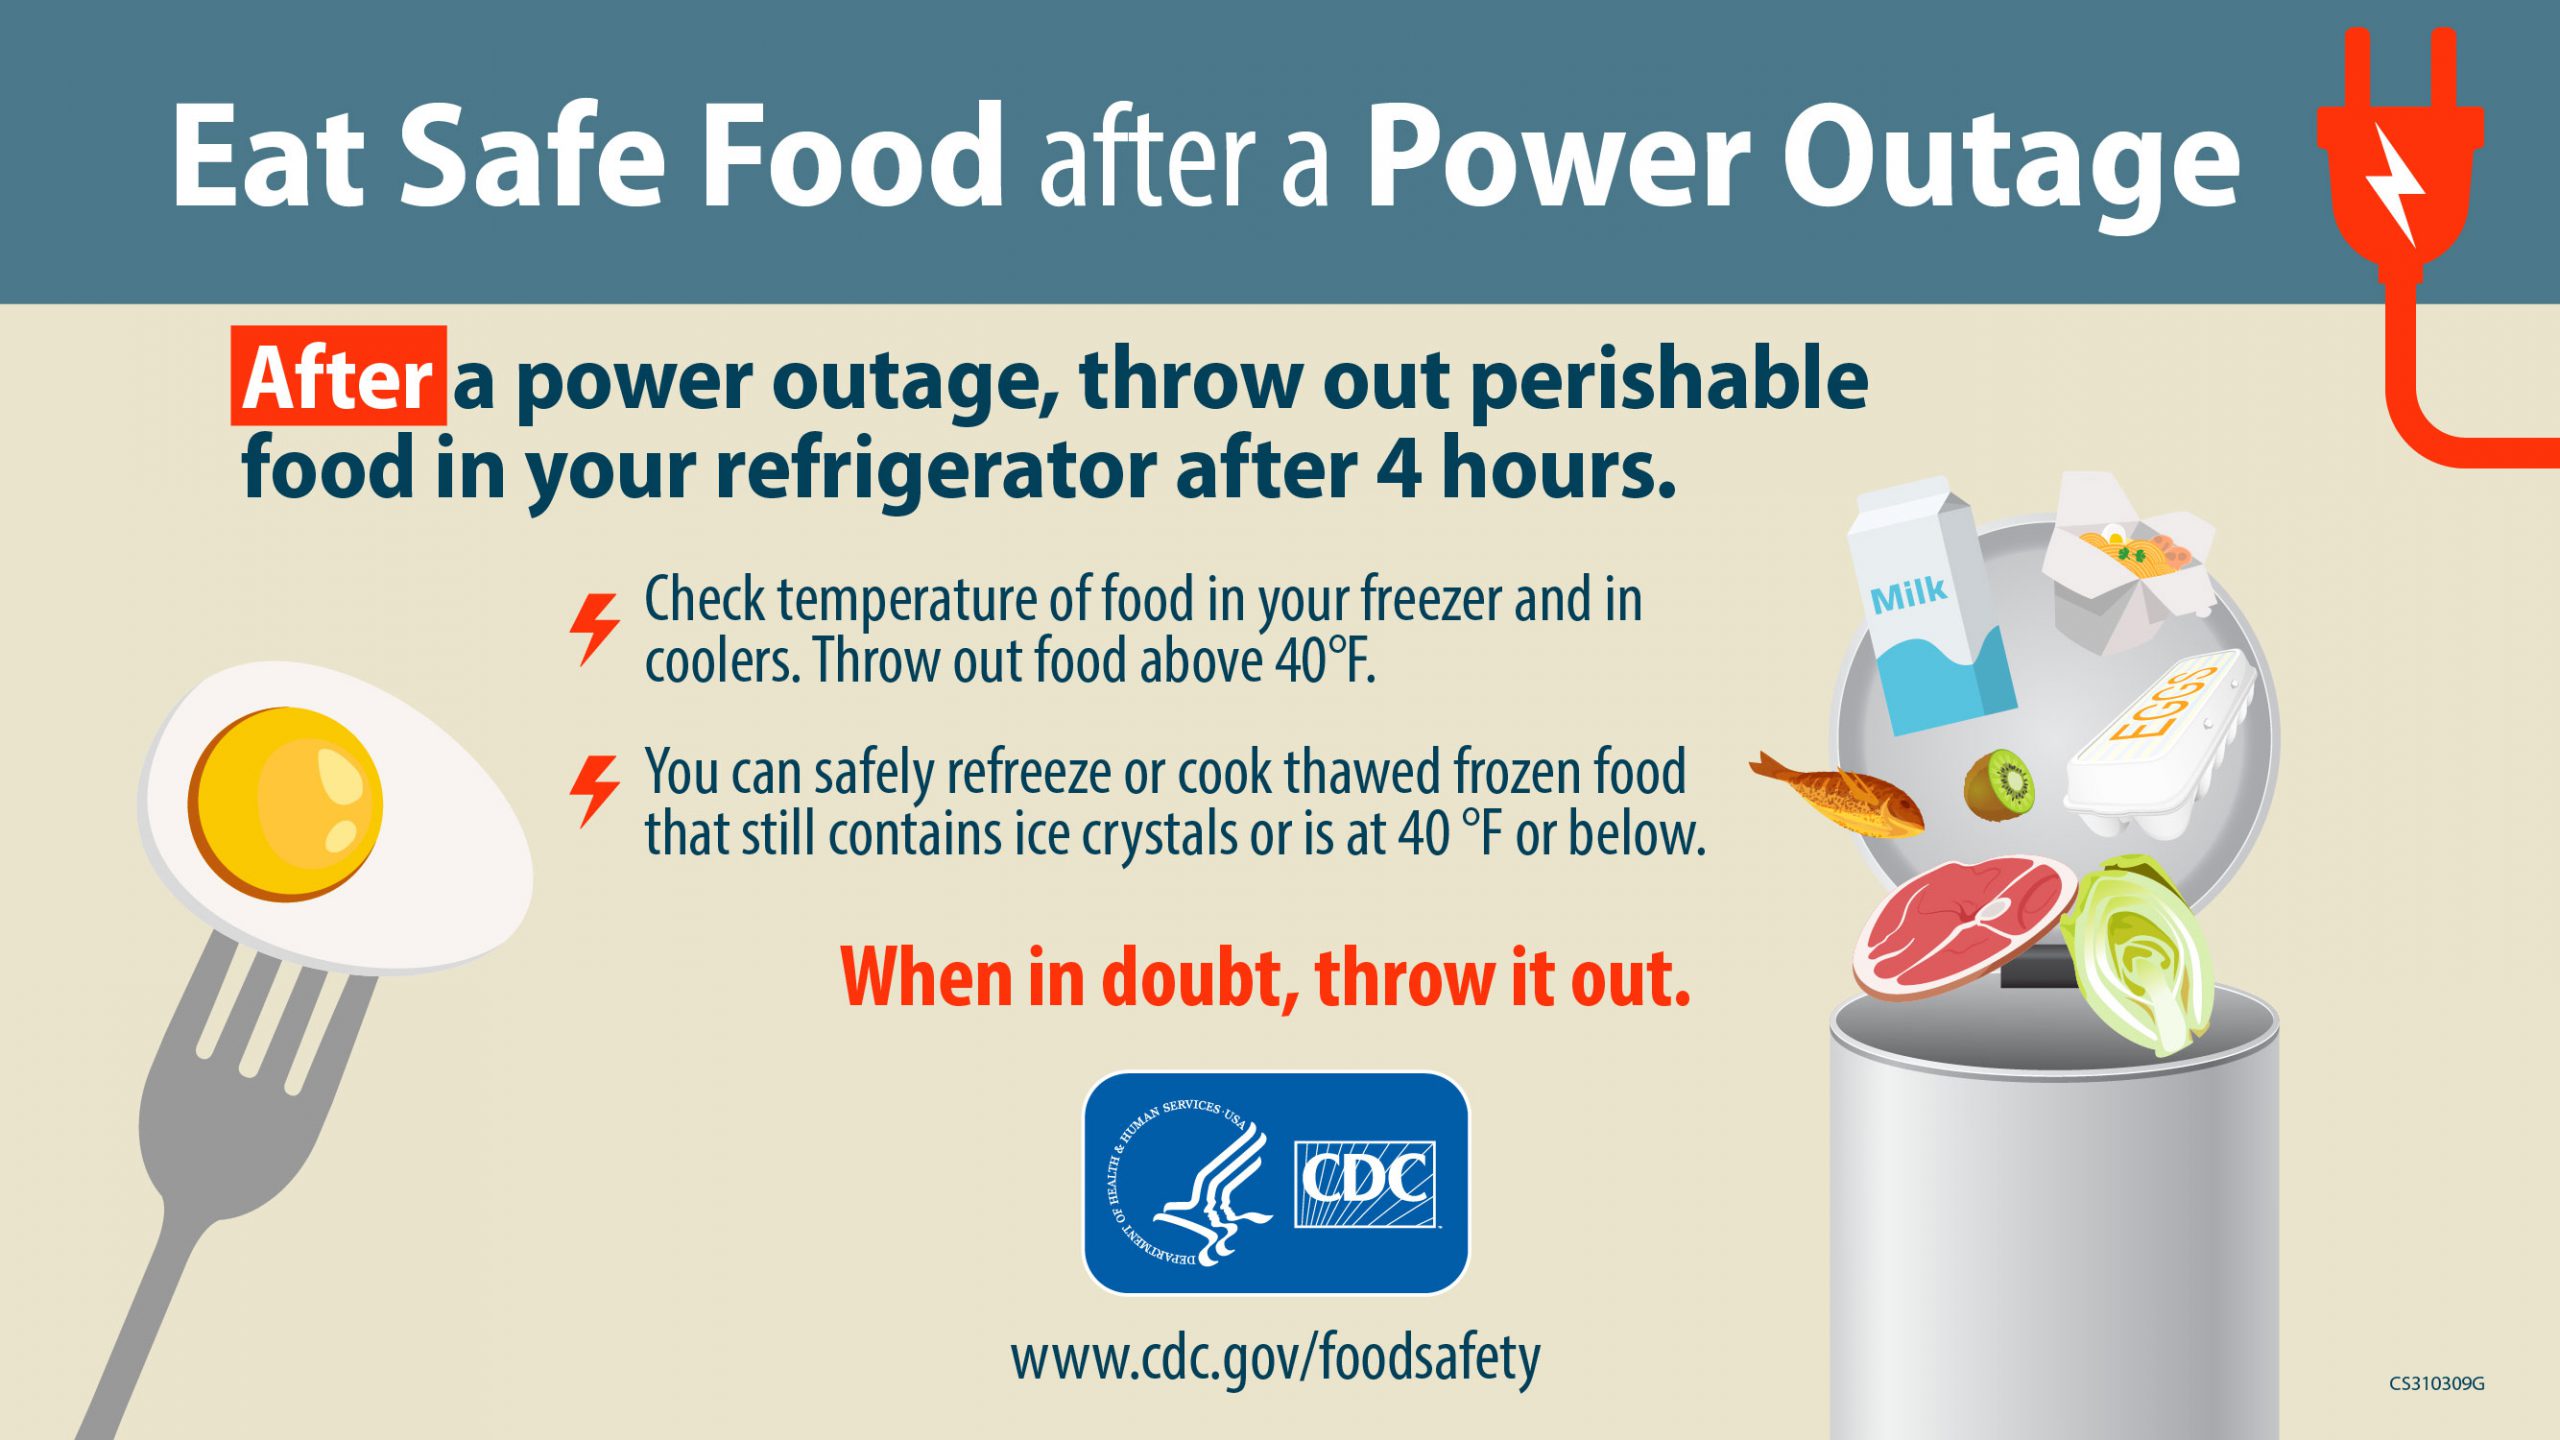 Never taste food to determine if it is safe to eat. When in doubt, throw it out.
Throw out perishable food in your refrigerator (meat, fish, cut fruits and vegetables, eggs, milk, and leftovers) after 4 hours without power or a cold source like dry ice. Throw out any food with an unusual odor, color, or texture.
Check temperatures of food kept in coolers or your refrigerator with an added cold source. Throw out food above 40°
If you have an appliance thermometer in your freezer, check to see if it is still at 40 °F or below.
You can safely refreeze or cook thawed frozen food that still contains ice crystals or is at 40 °F or below.